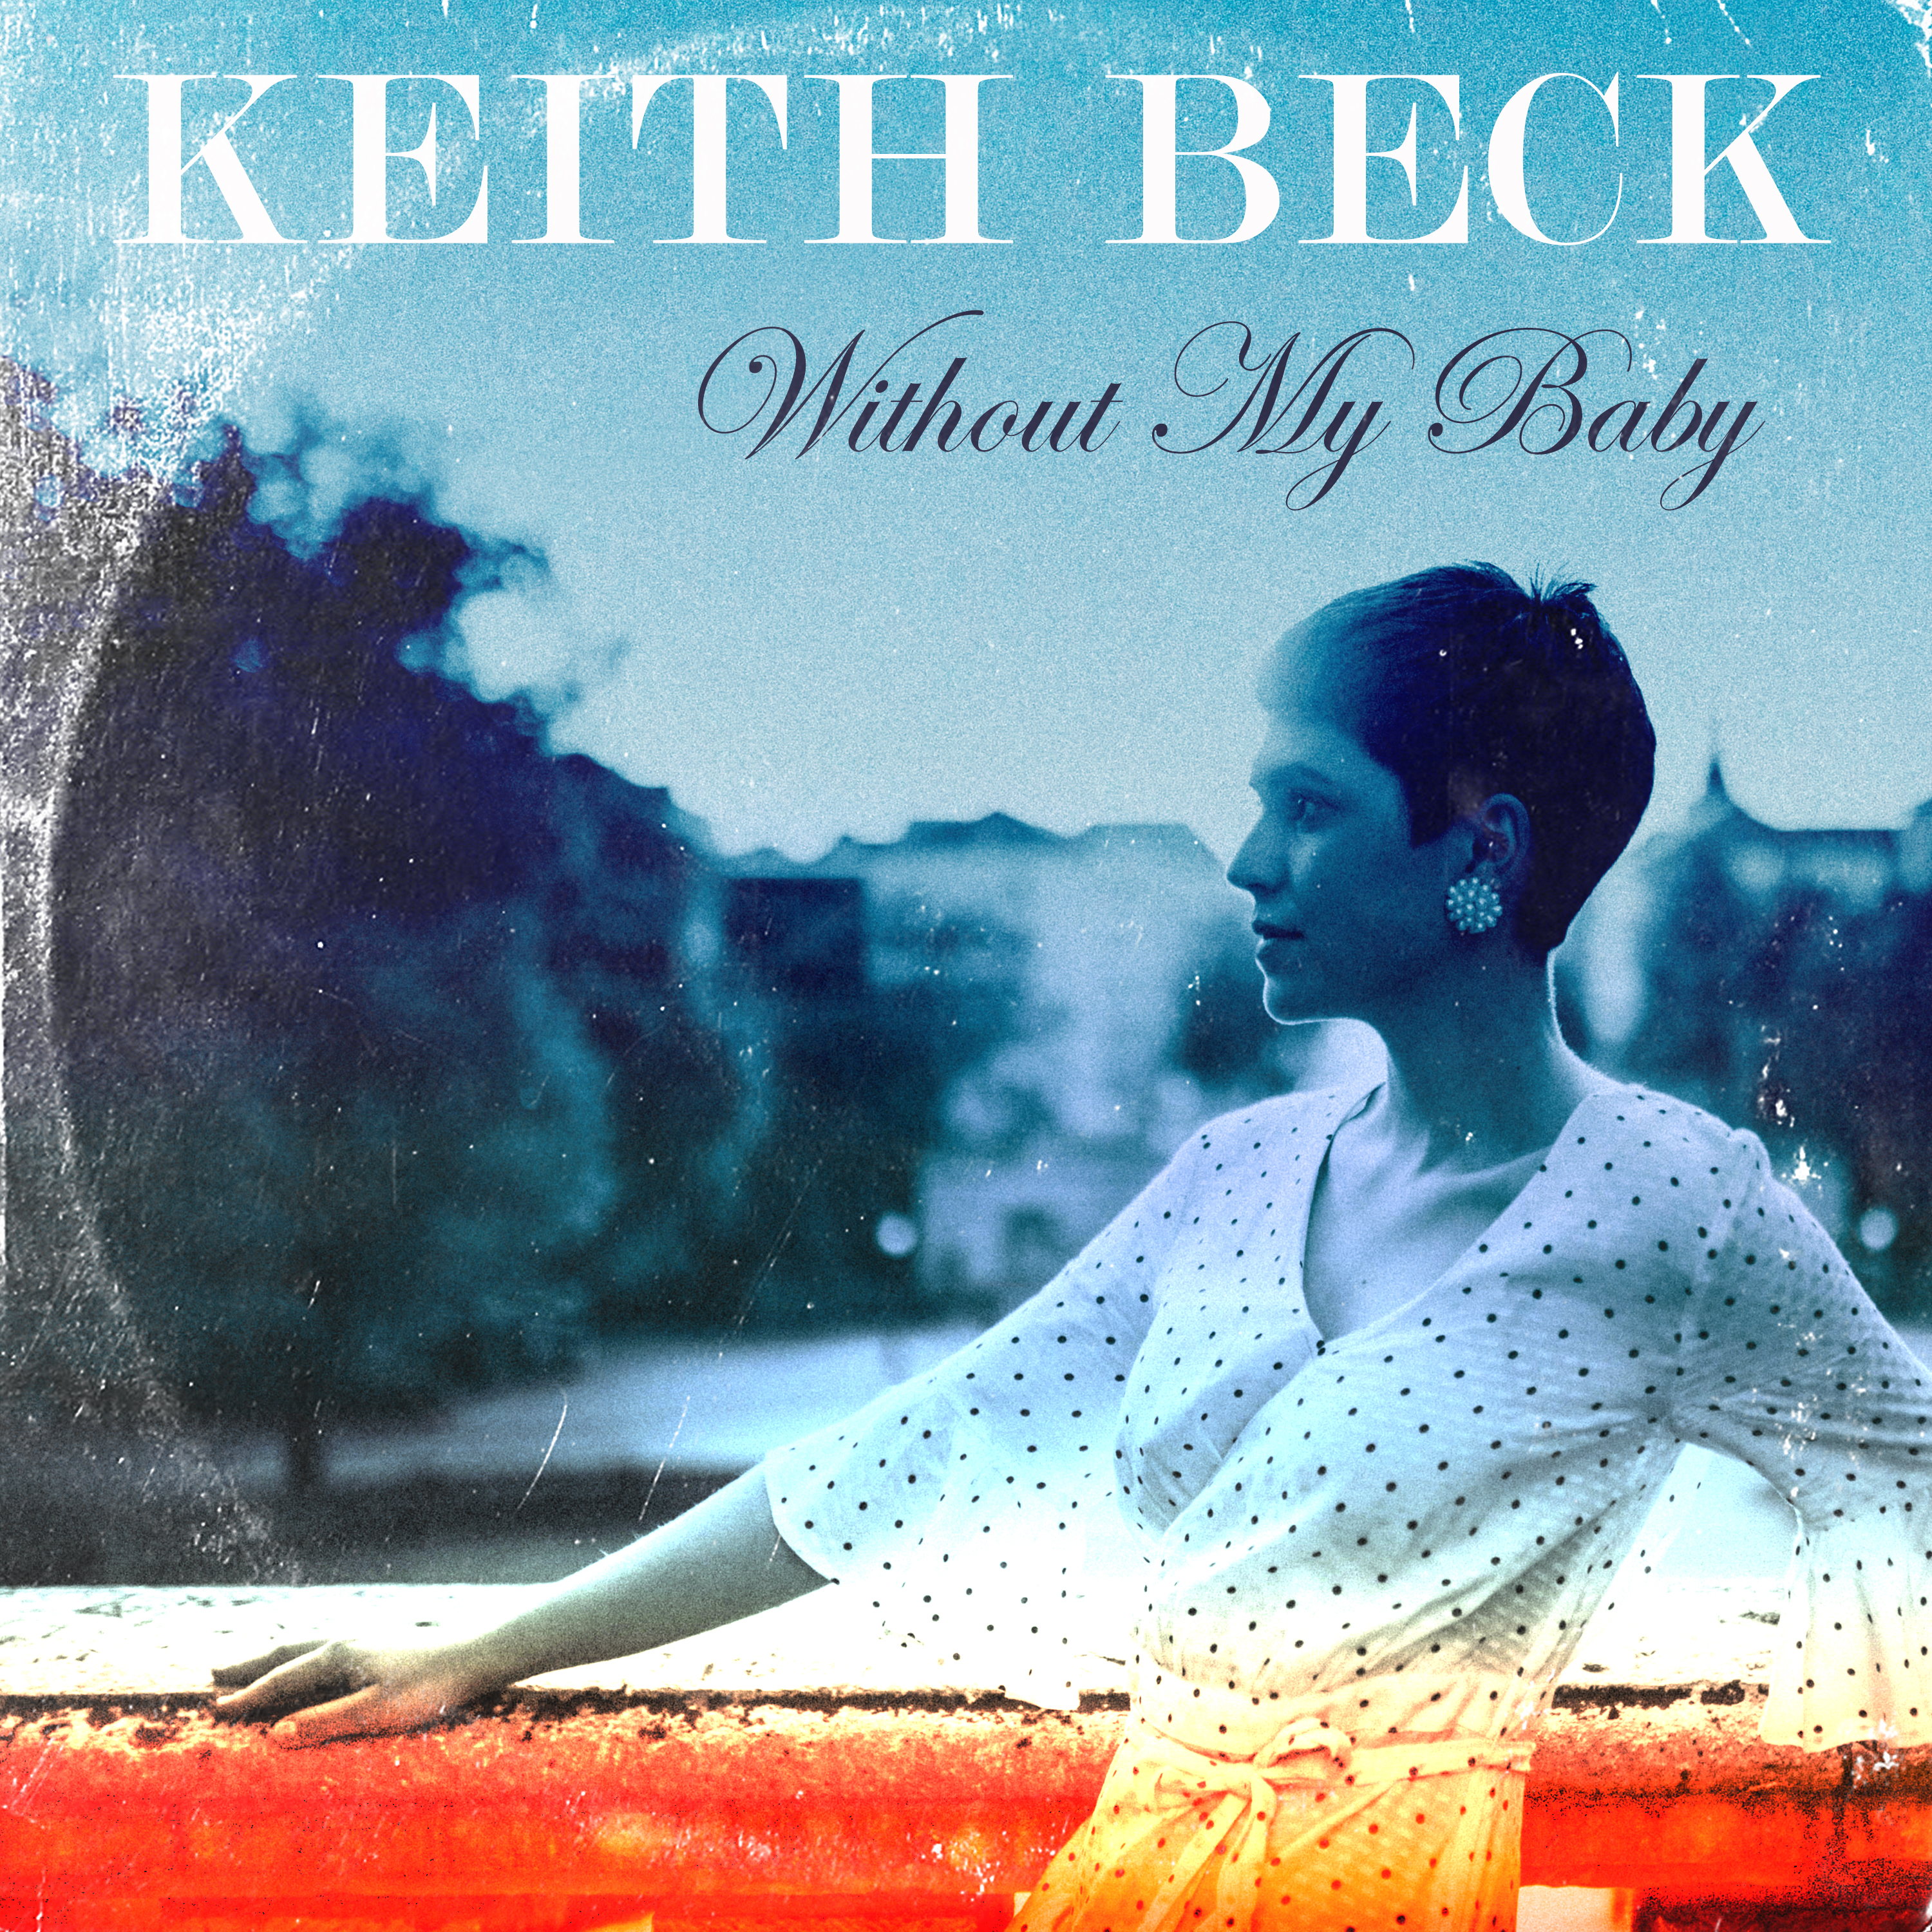 Keith Beck New Summer Anthem, "Without My Baby!"